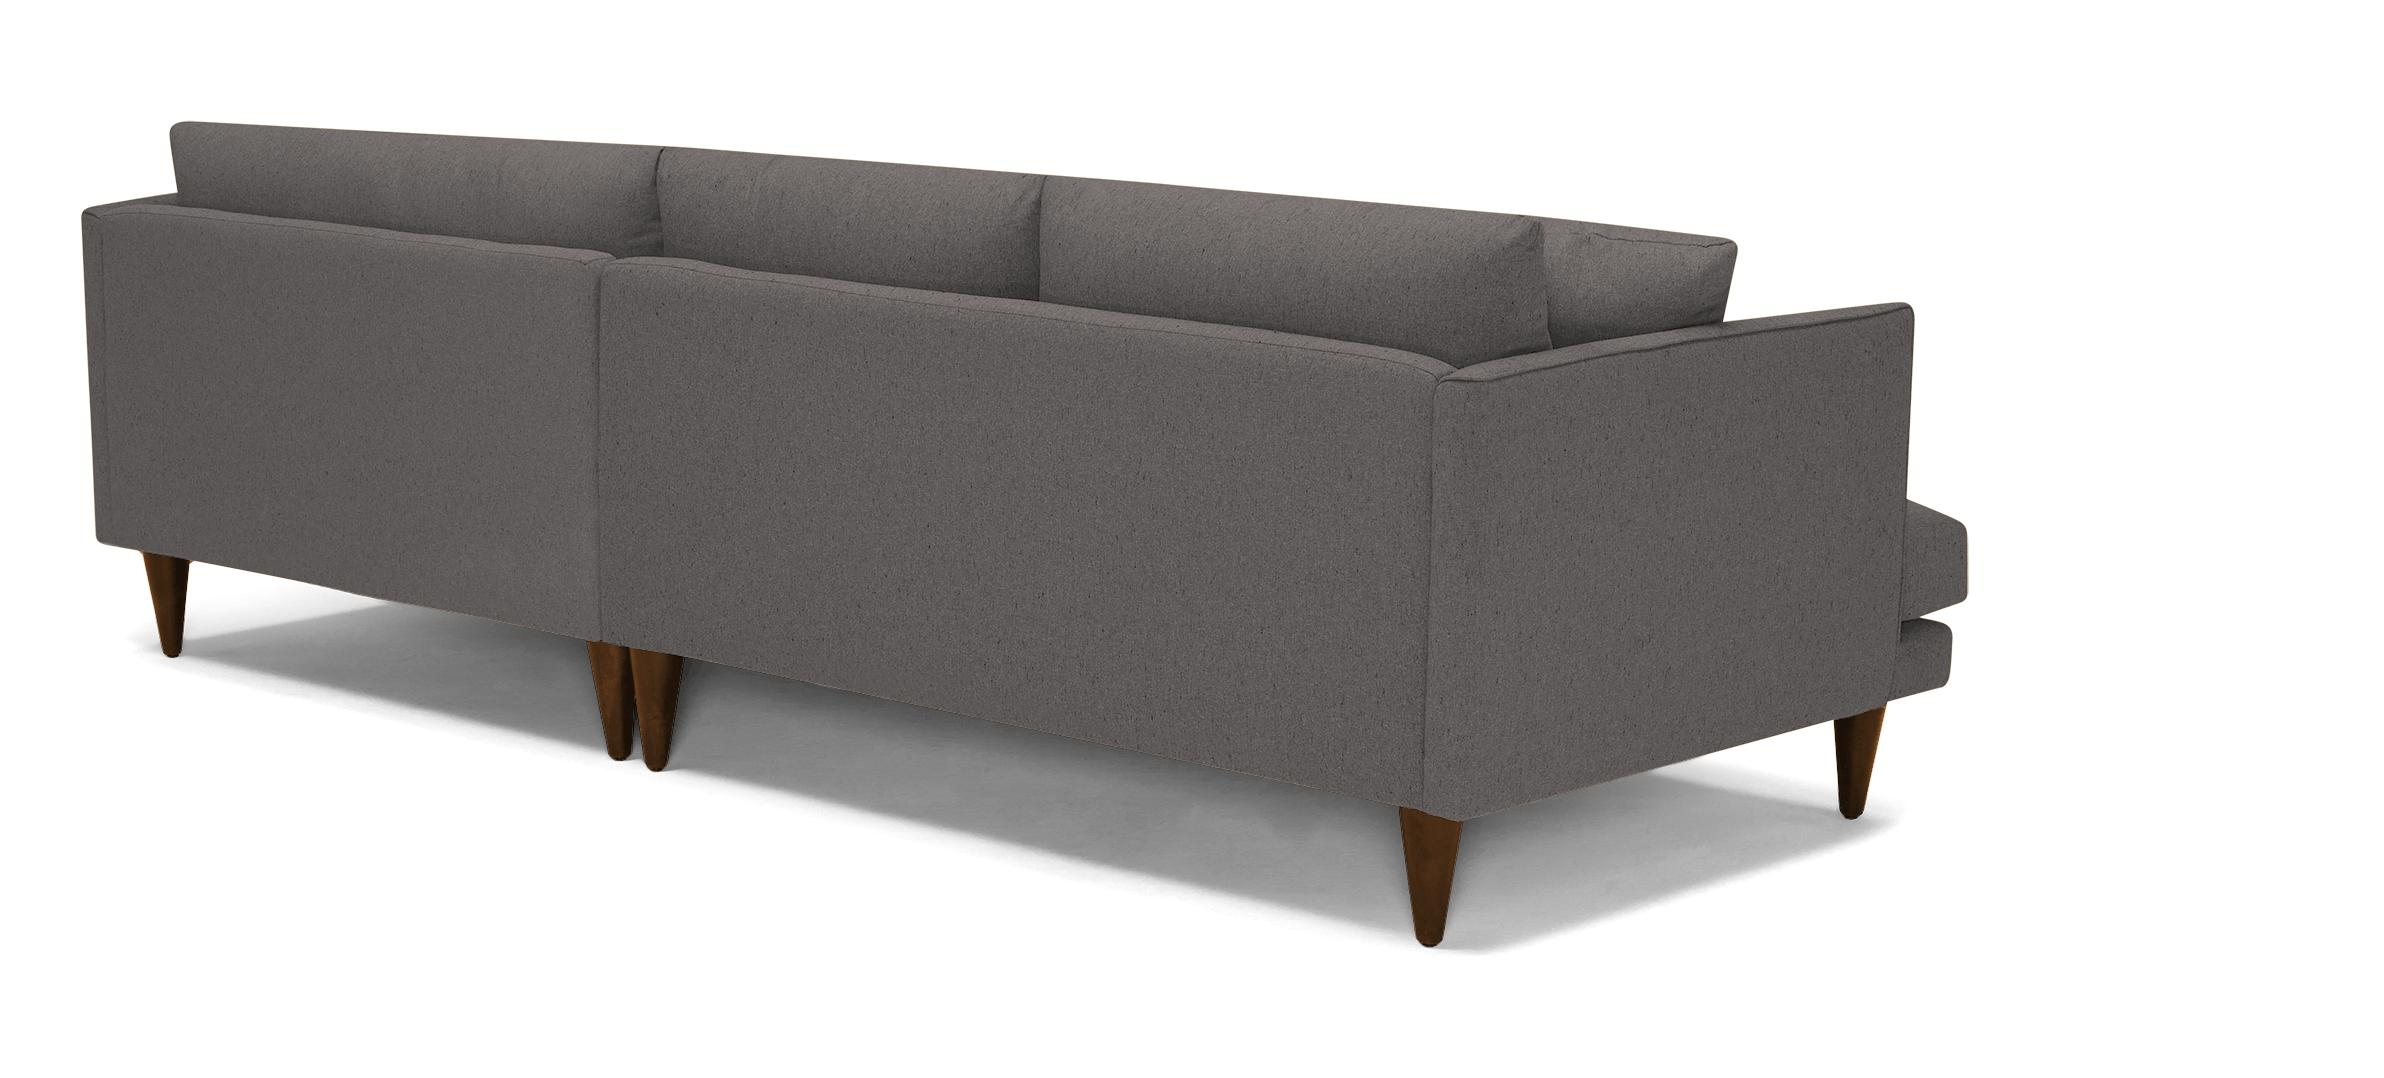 Gray Lewis Mid Century Modern Sectional - Cordova Eclipse - Mocha - Right - Cone - Image 3